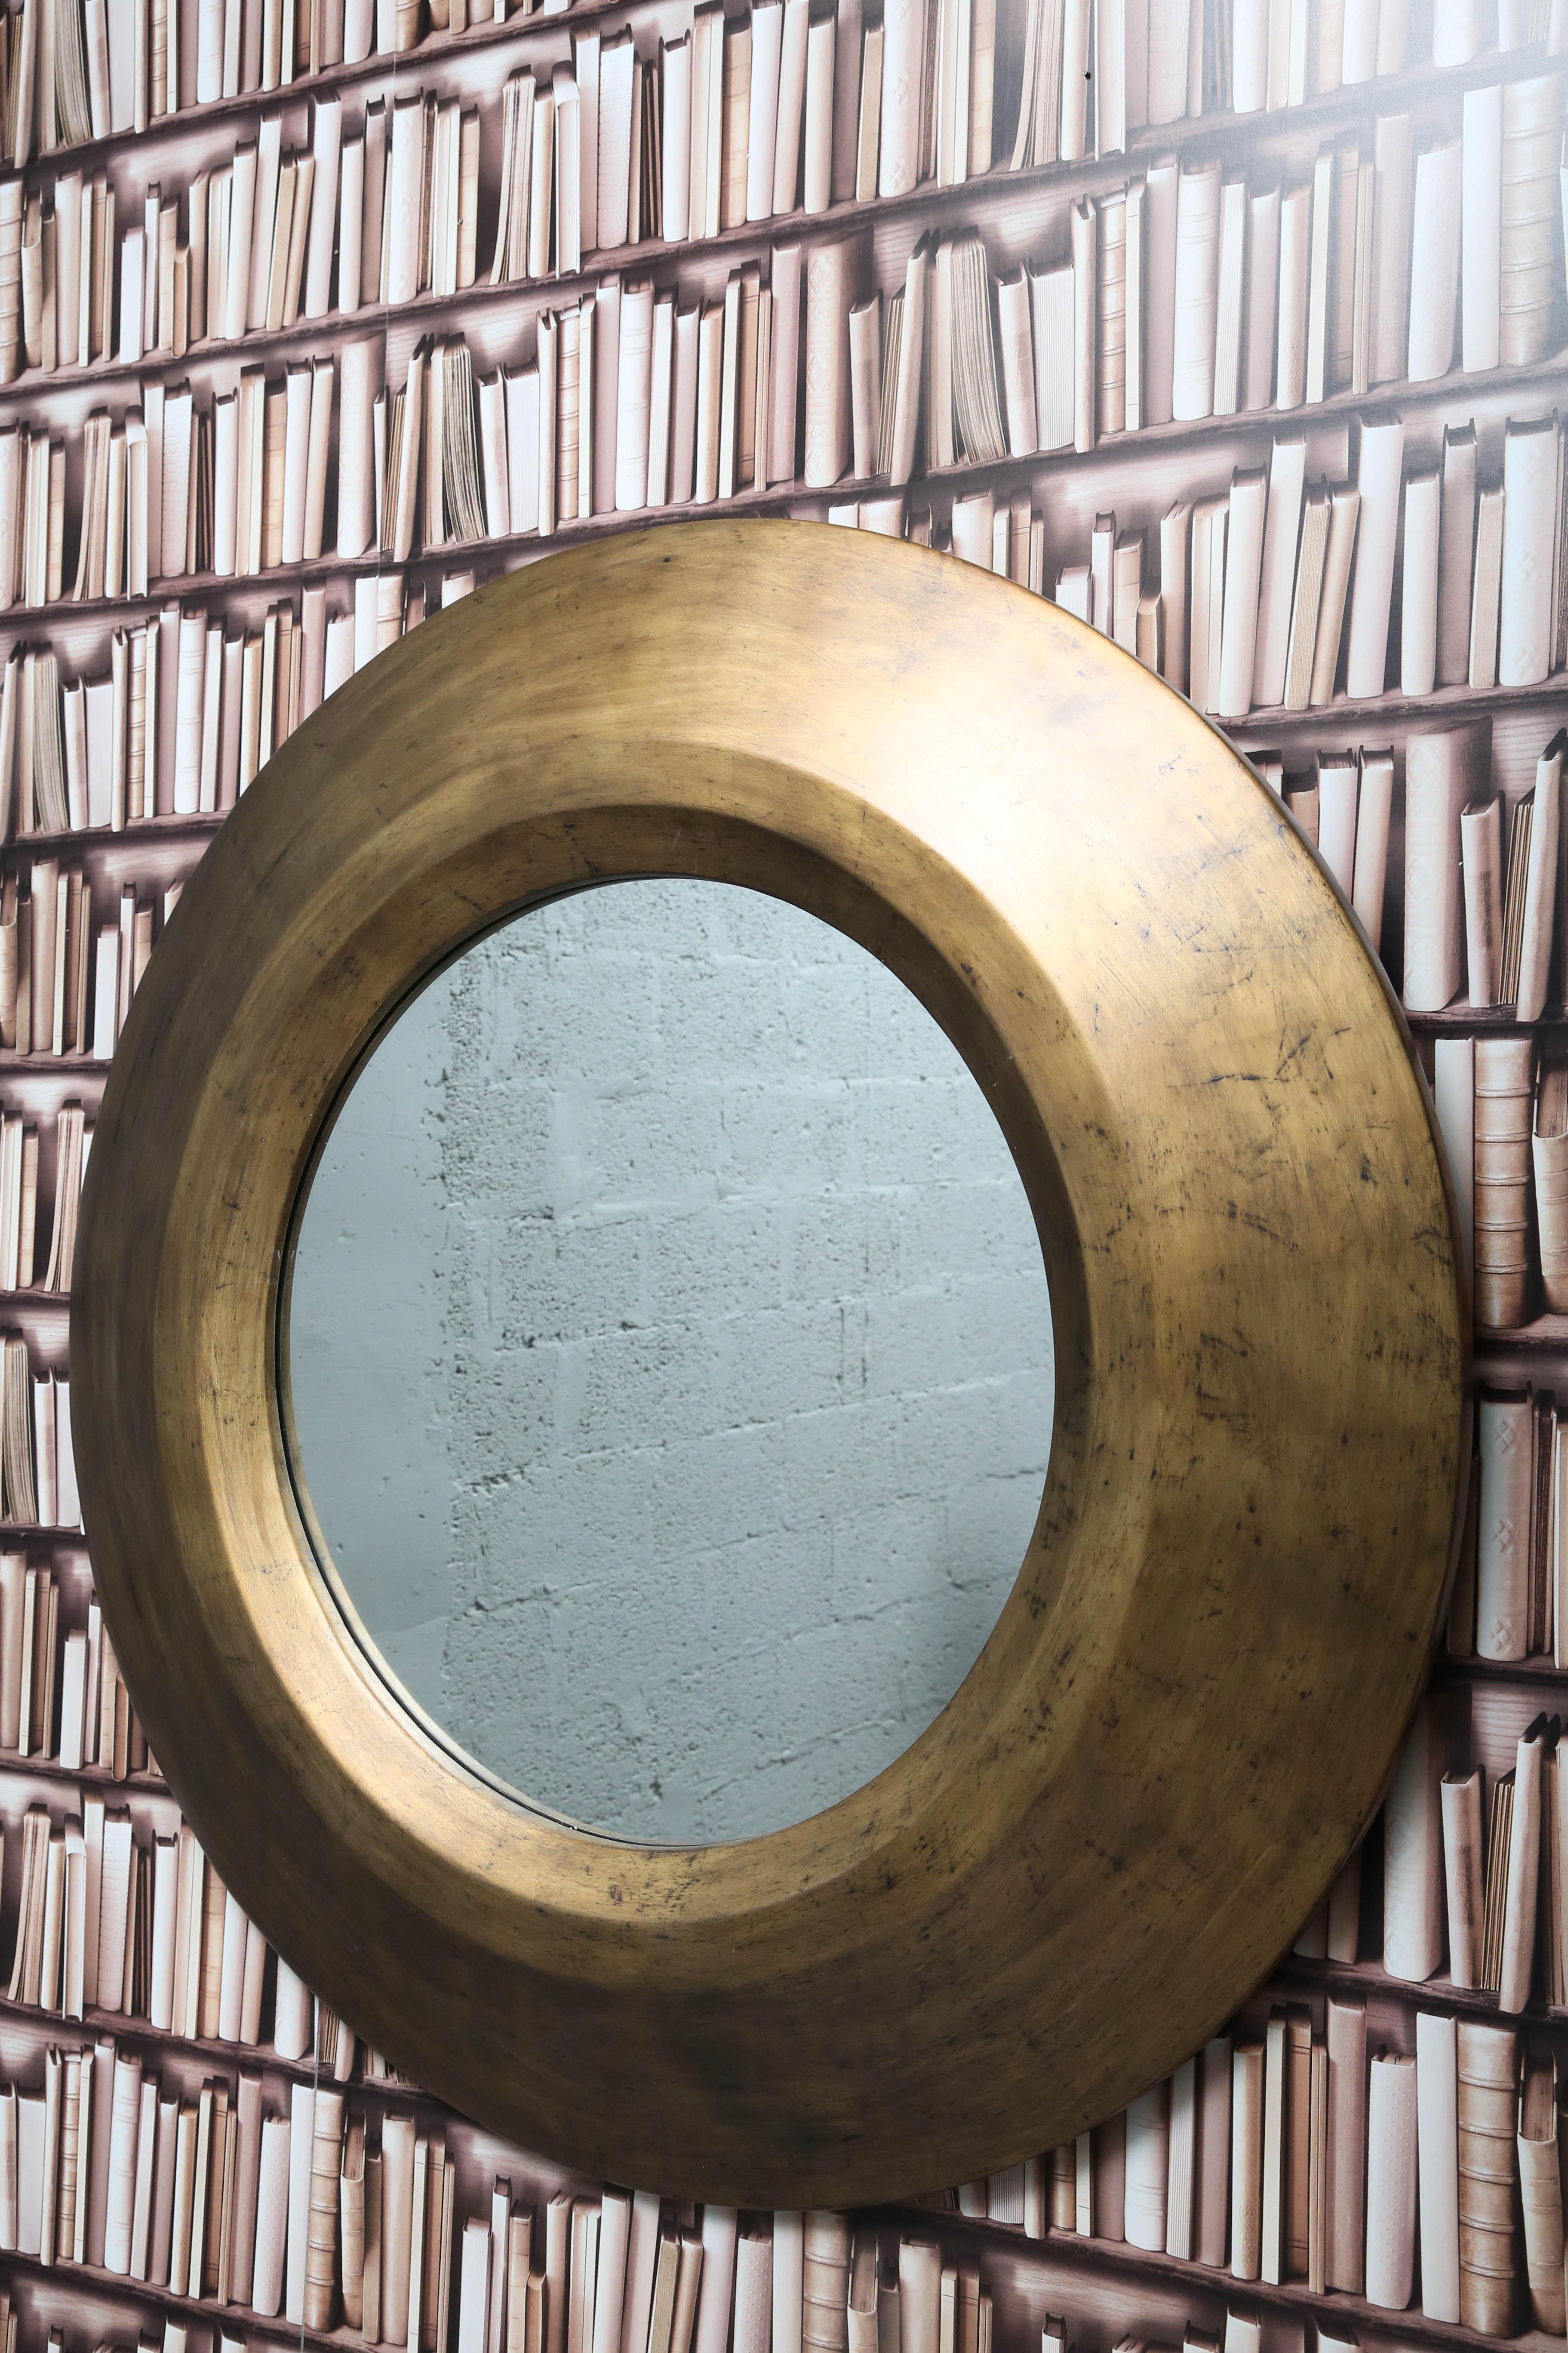 Oversized round mirror in gold by Serge de Troyer. Fabricated in Belgium.